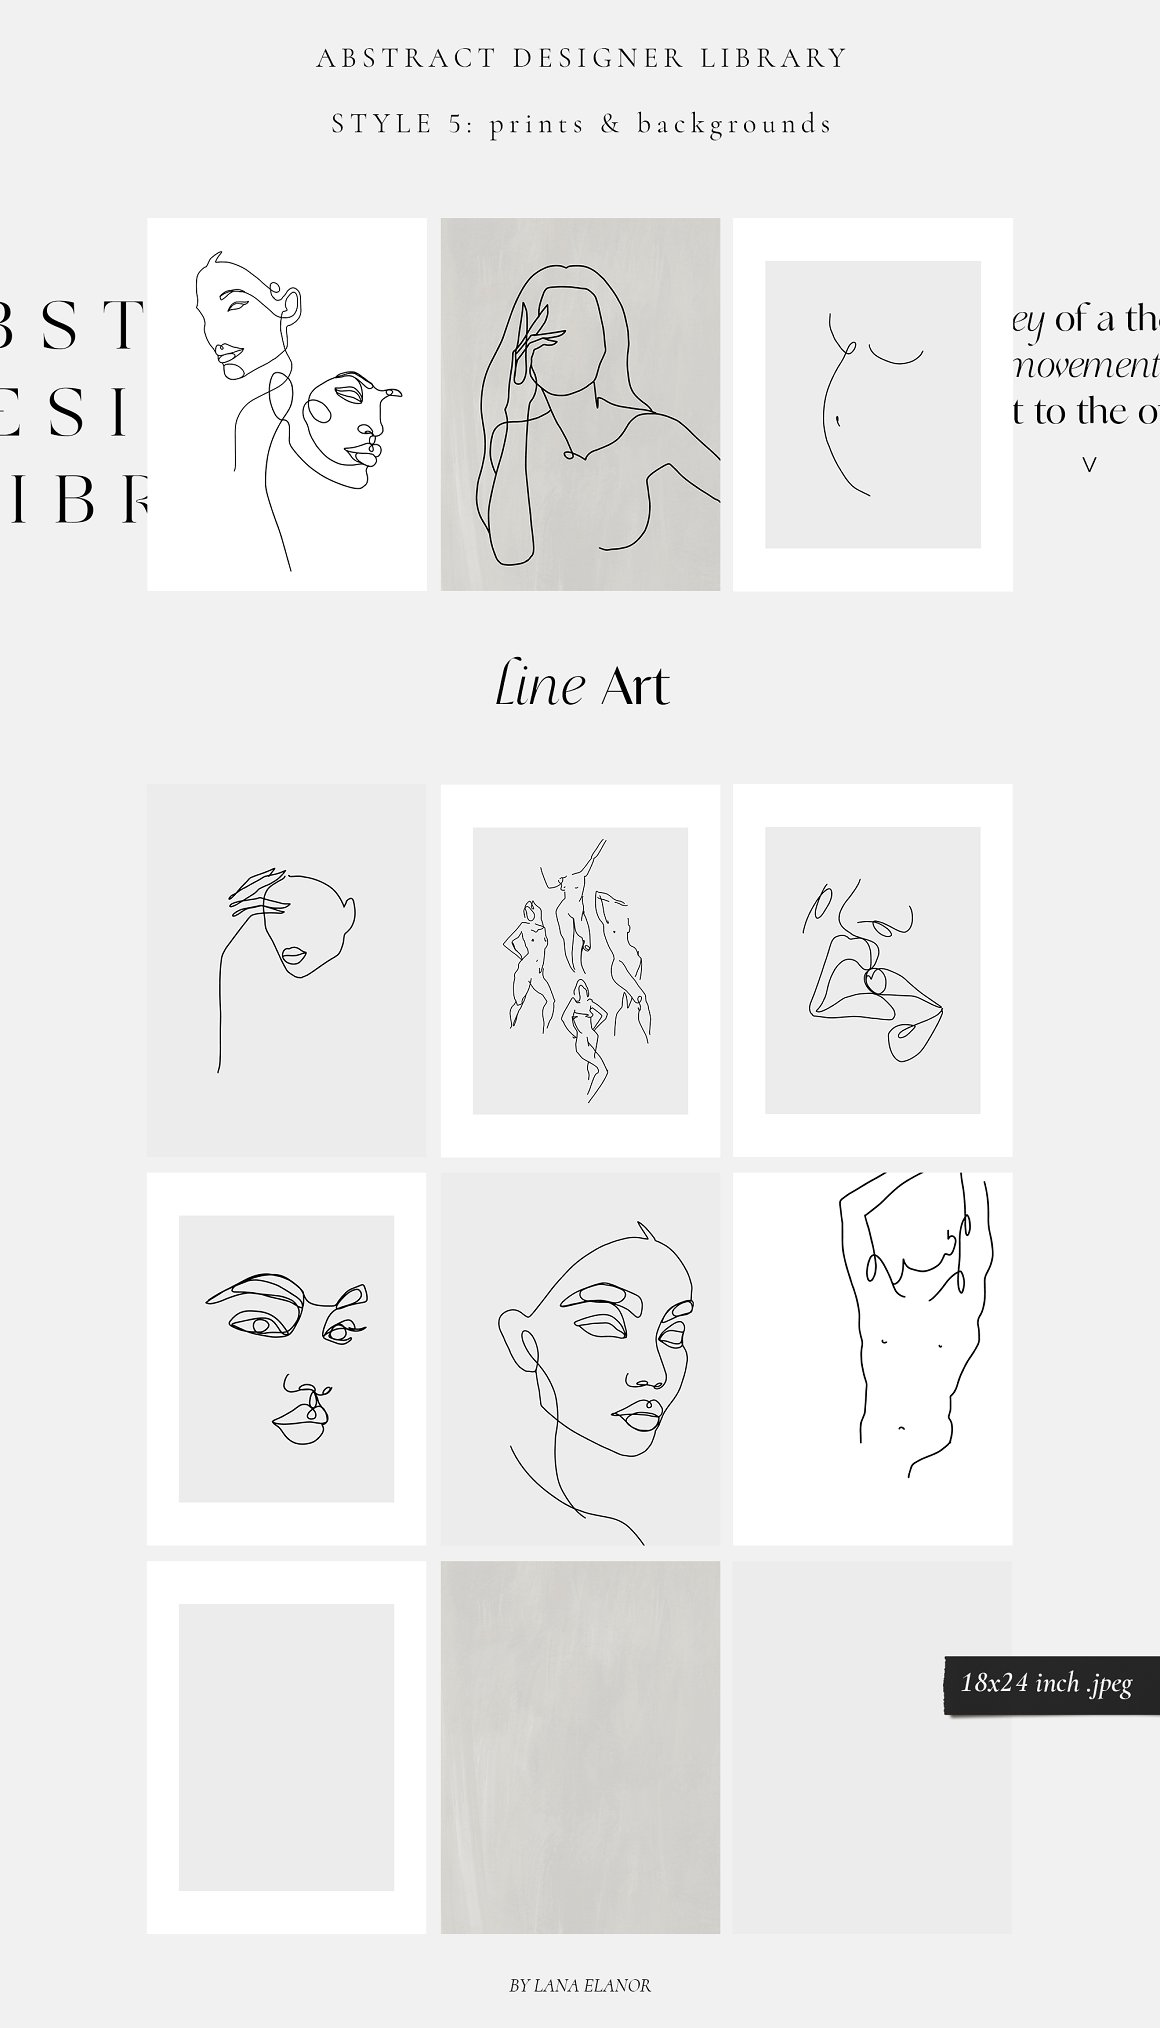 Line art library on a gray background.